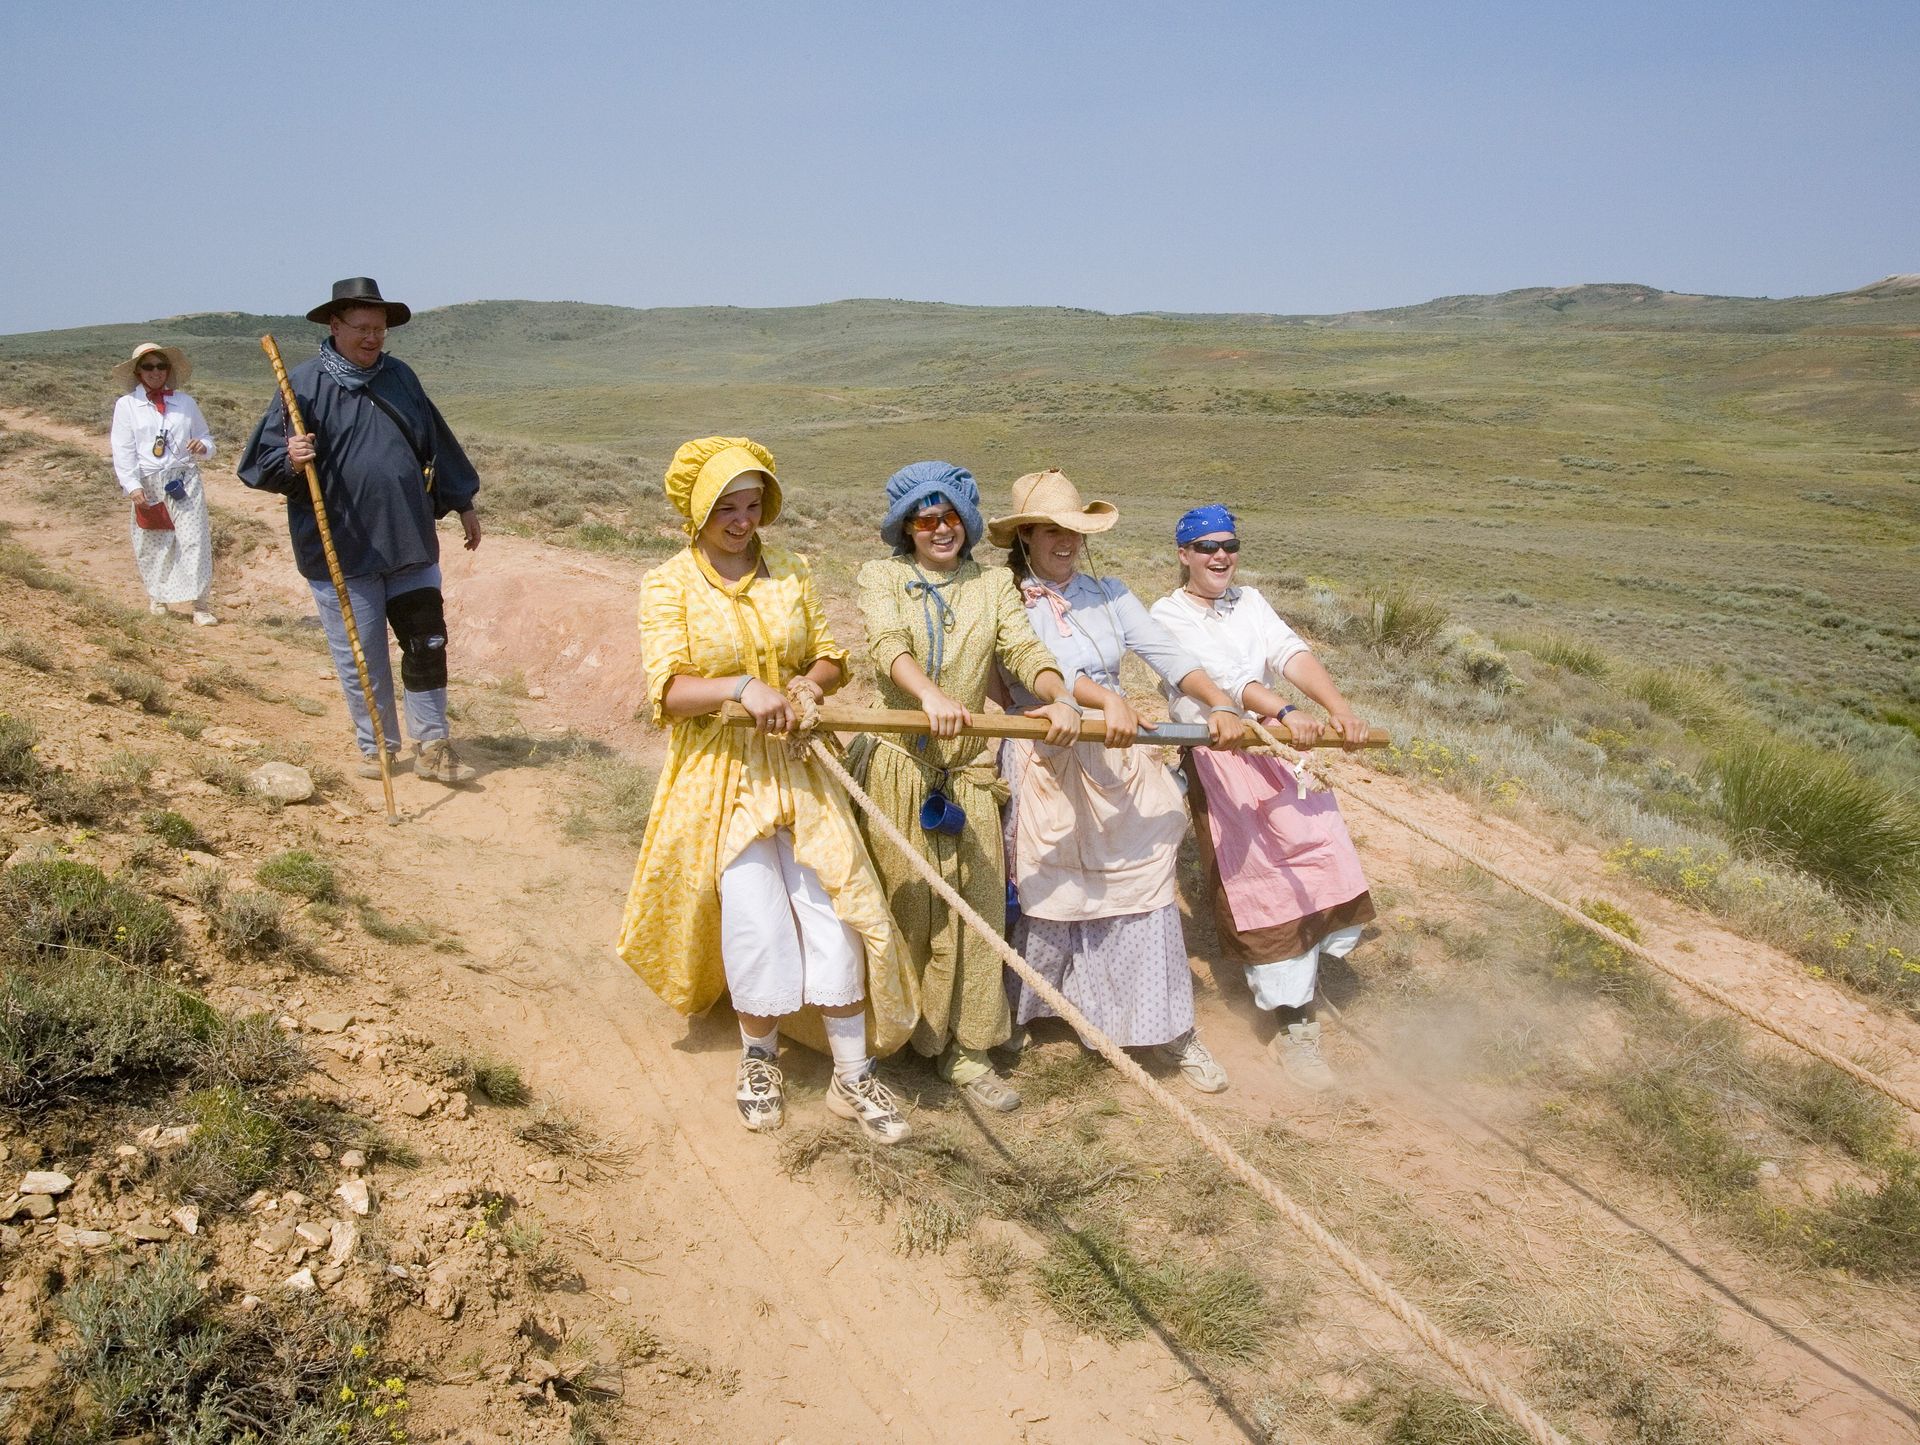 Four young women pull on a beam attached by ropes to a handcart and help guide the cart down a hill.